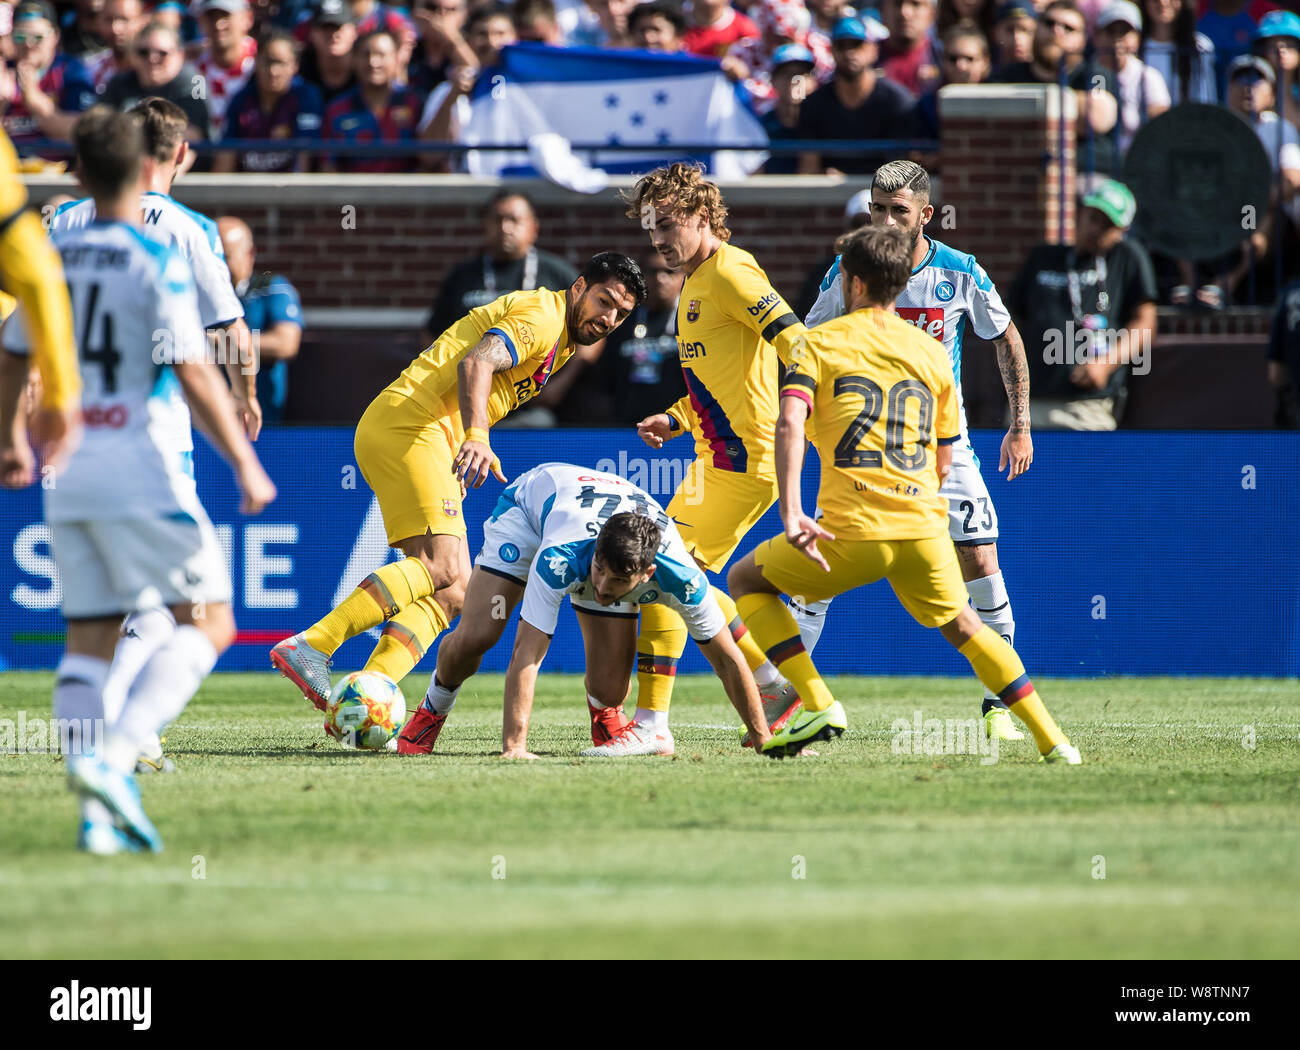 August 10, 2019, Ann Arbor, Michigan, USA: Napoli Defender KOSTAS MANOLAS #44 fights for the ball during a match between SSC Napoli and FC Barcelona at Michigan Stadium. Barcelona won the match 4-0. (Credit Image: © Scott Hasse/ZUMA Wire) Stock Photo